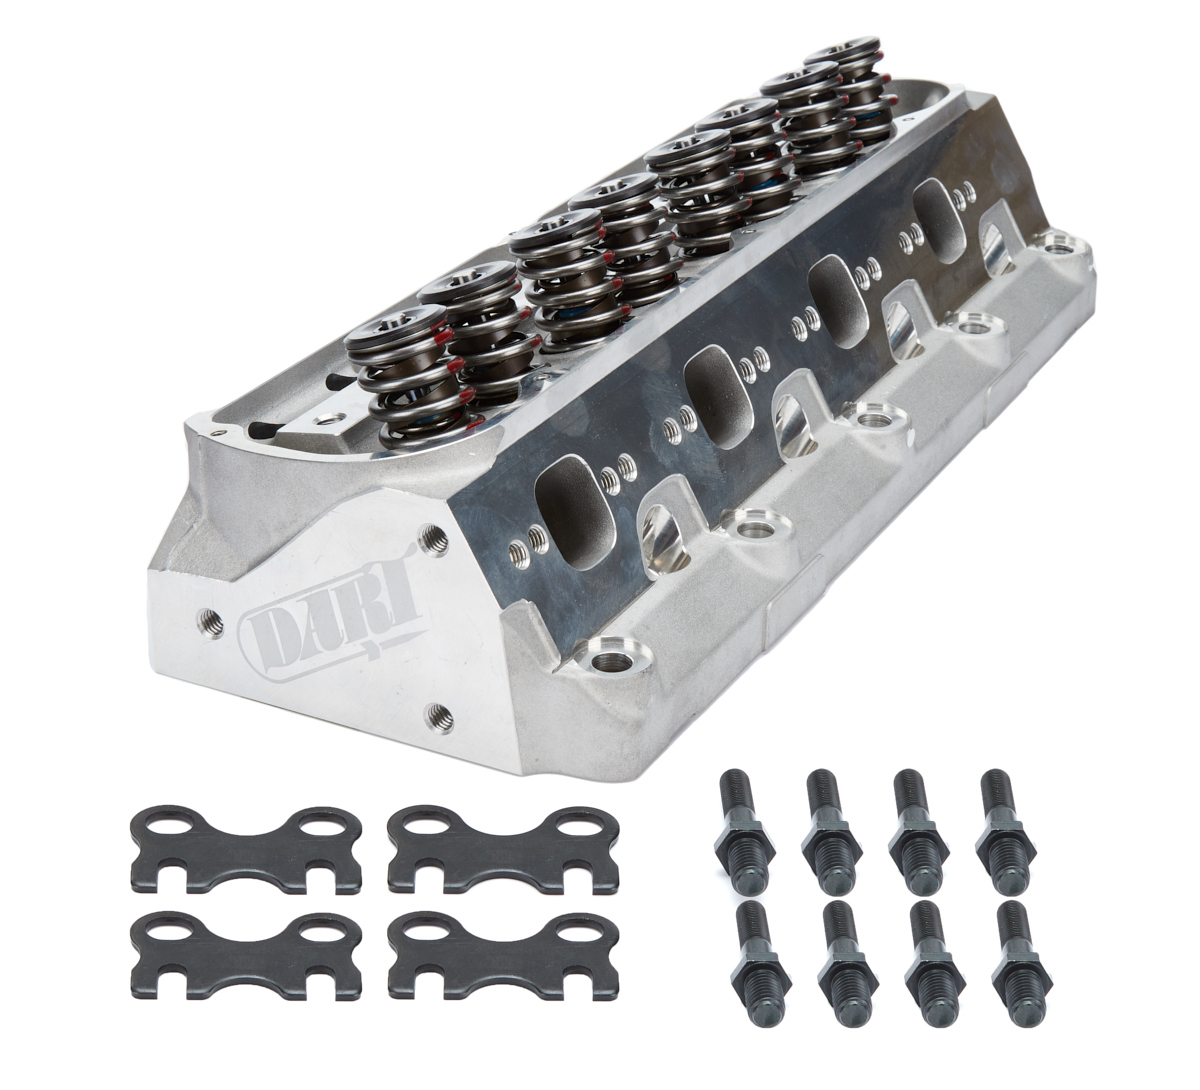 Dart 128225 Cylinder Head, SHP, 2.050 in / 1.600 in Valve, 205 cc Intake, 58 cc Chamber, 1.437 in Springs, Angle Plug, Aluminum, Small Block Ford, Each